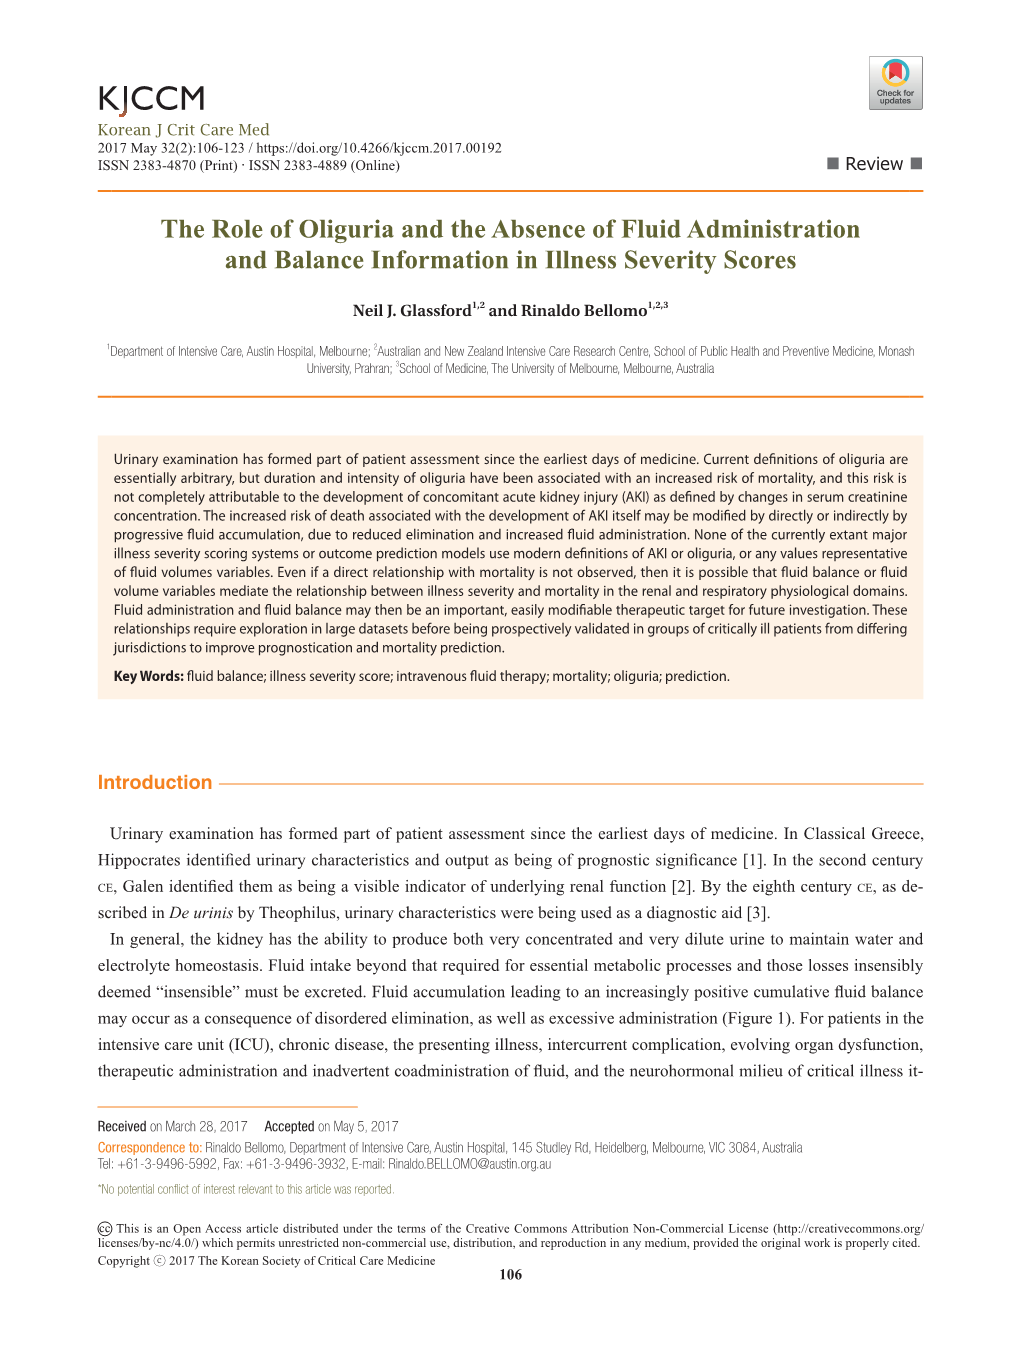 The Role of Oliguria and the Absence of Fluid Administration and Balance